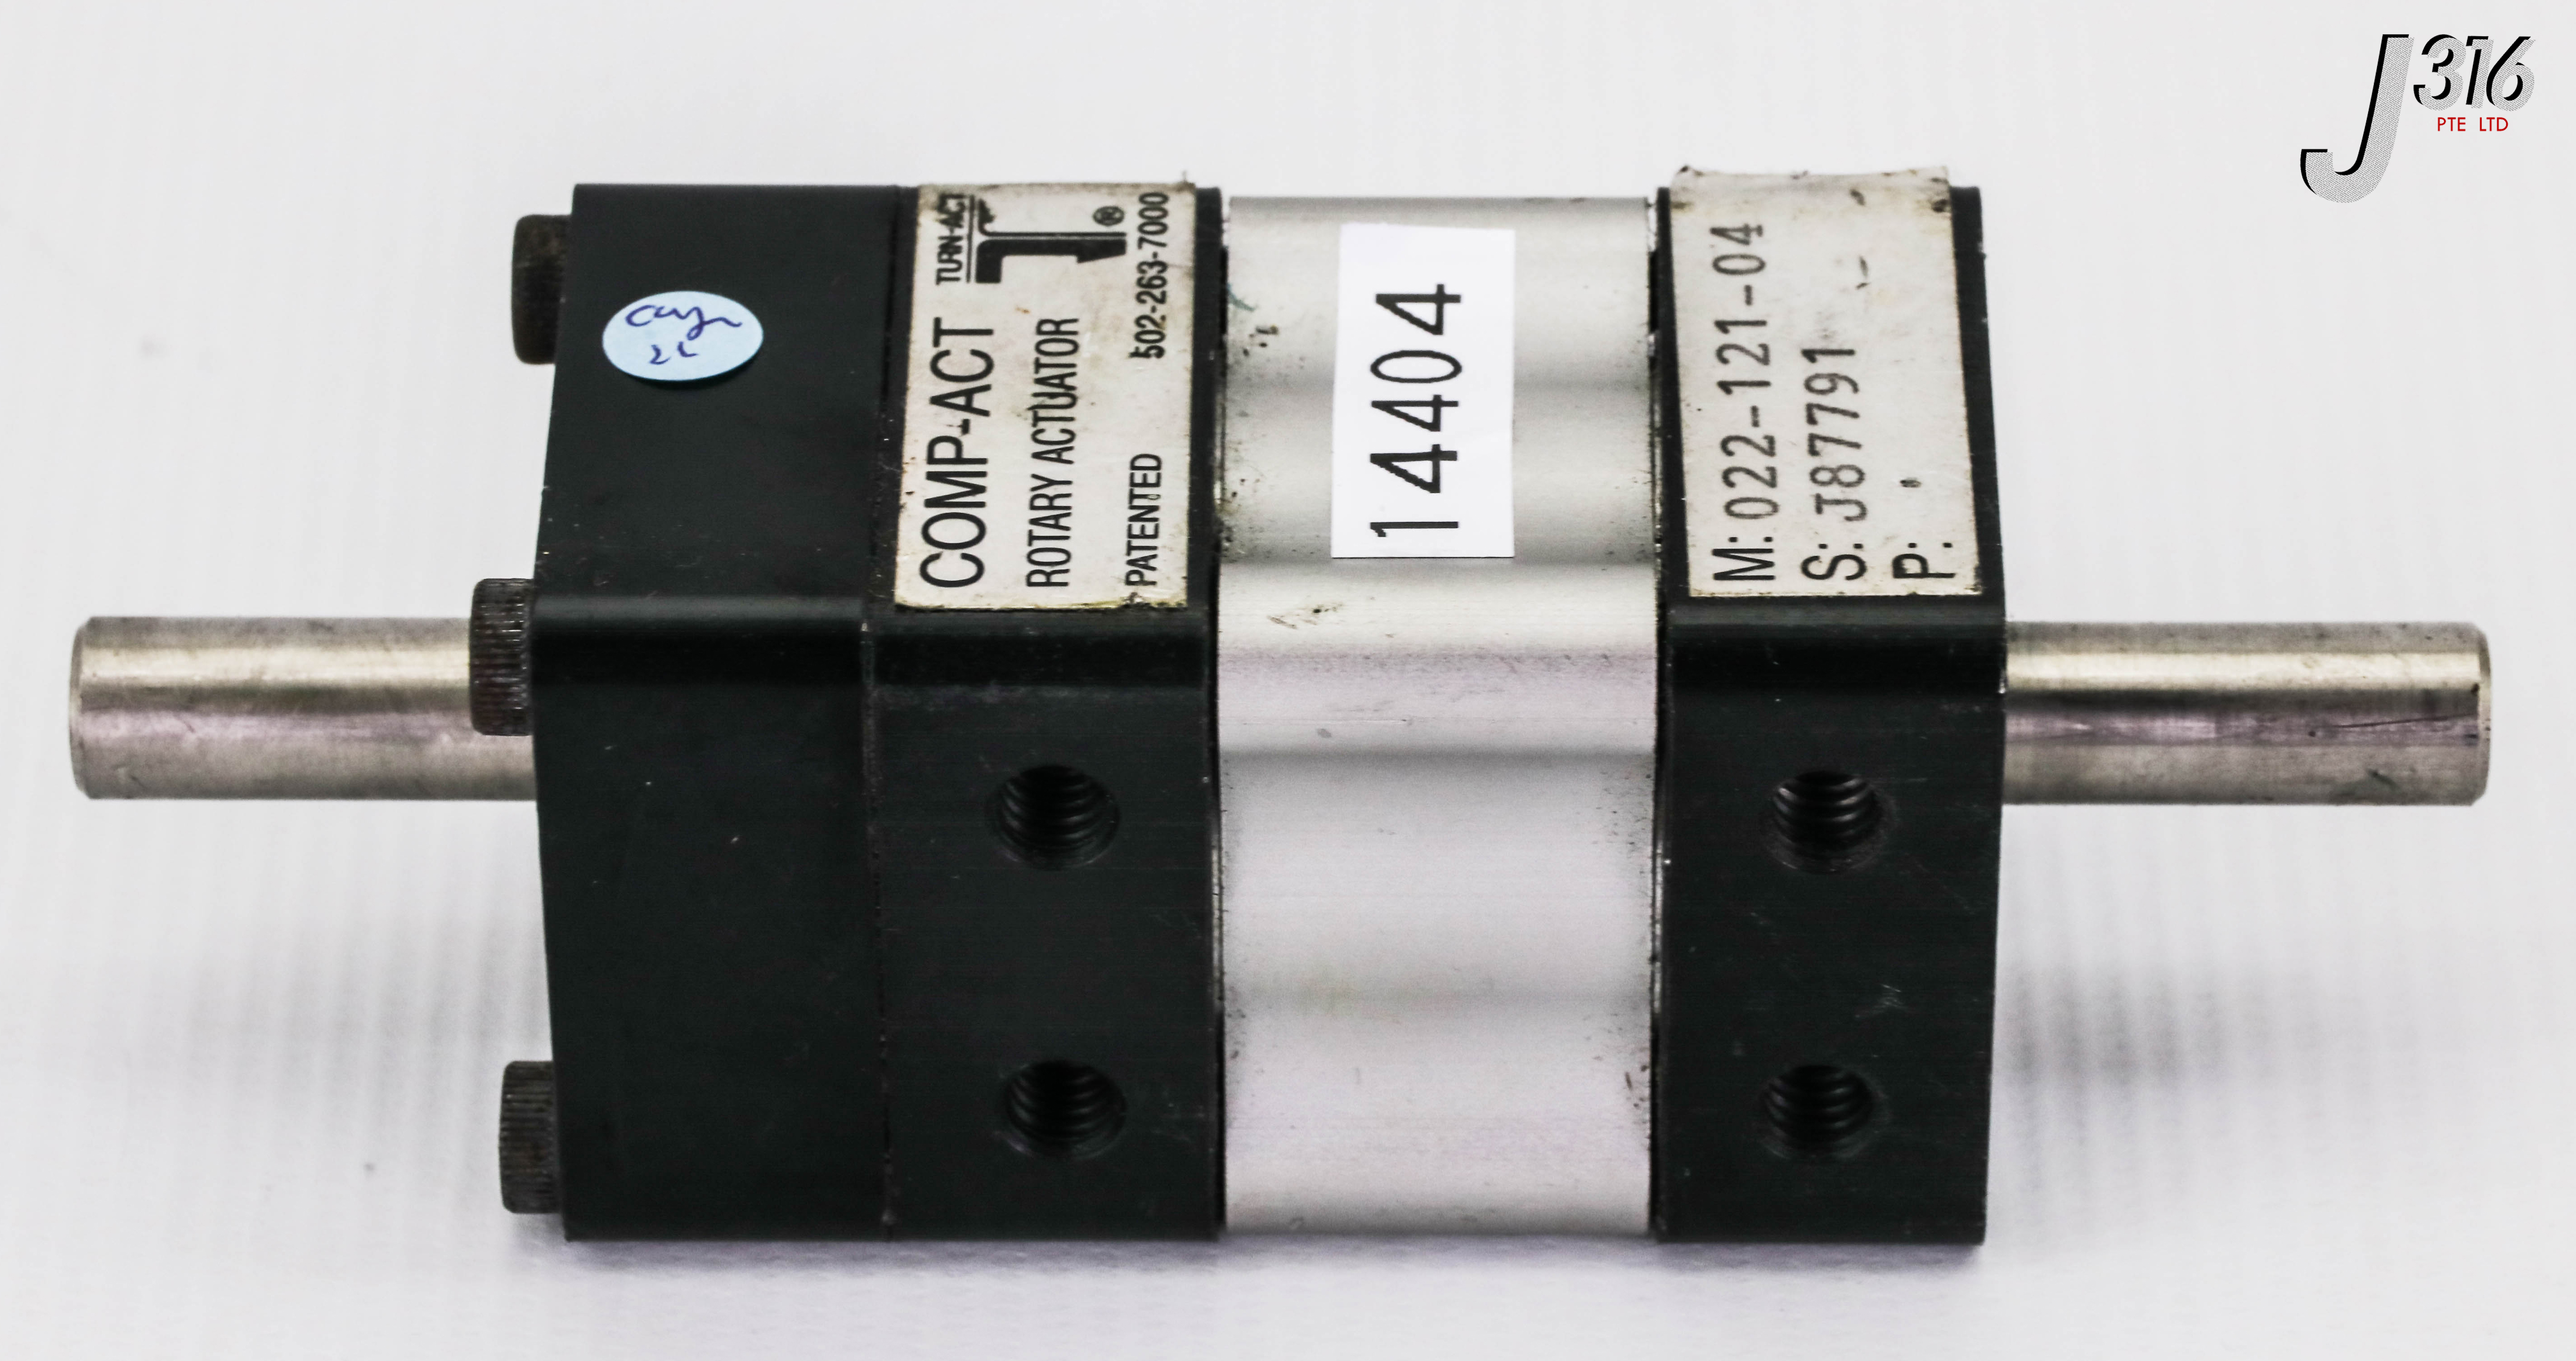 14404 TURN-ACT ROTARY ACTUATOR 022-121-04 – J316Gallery